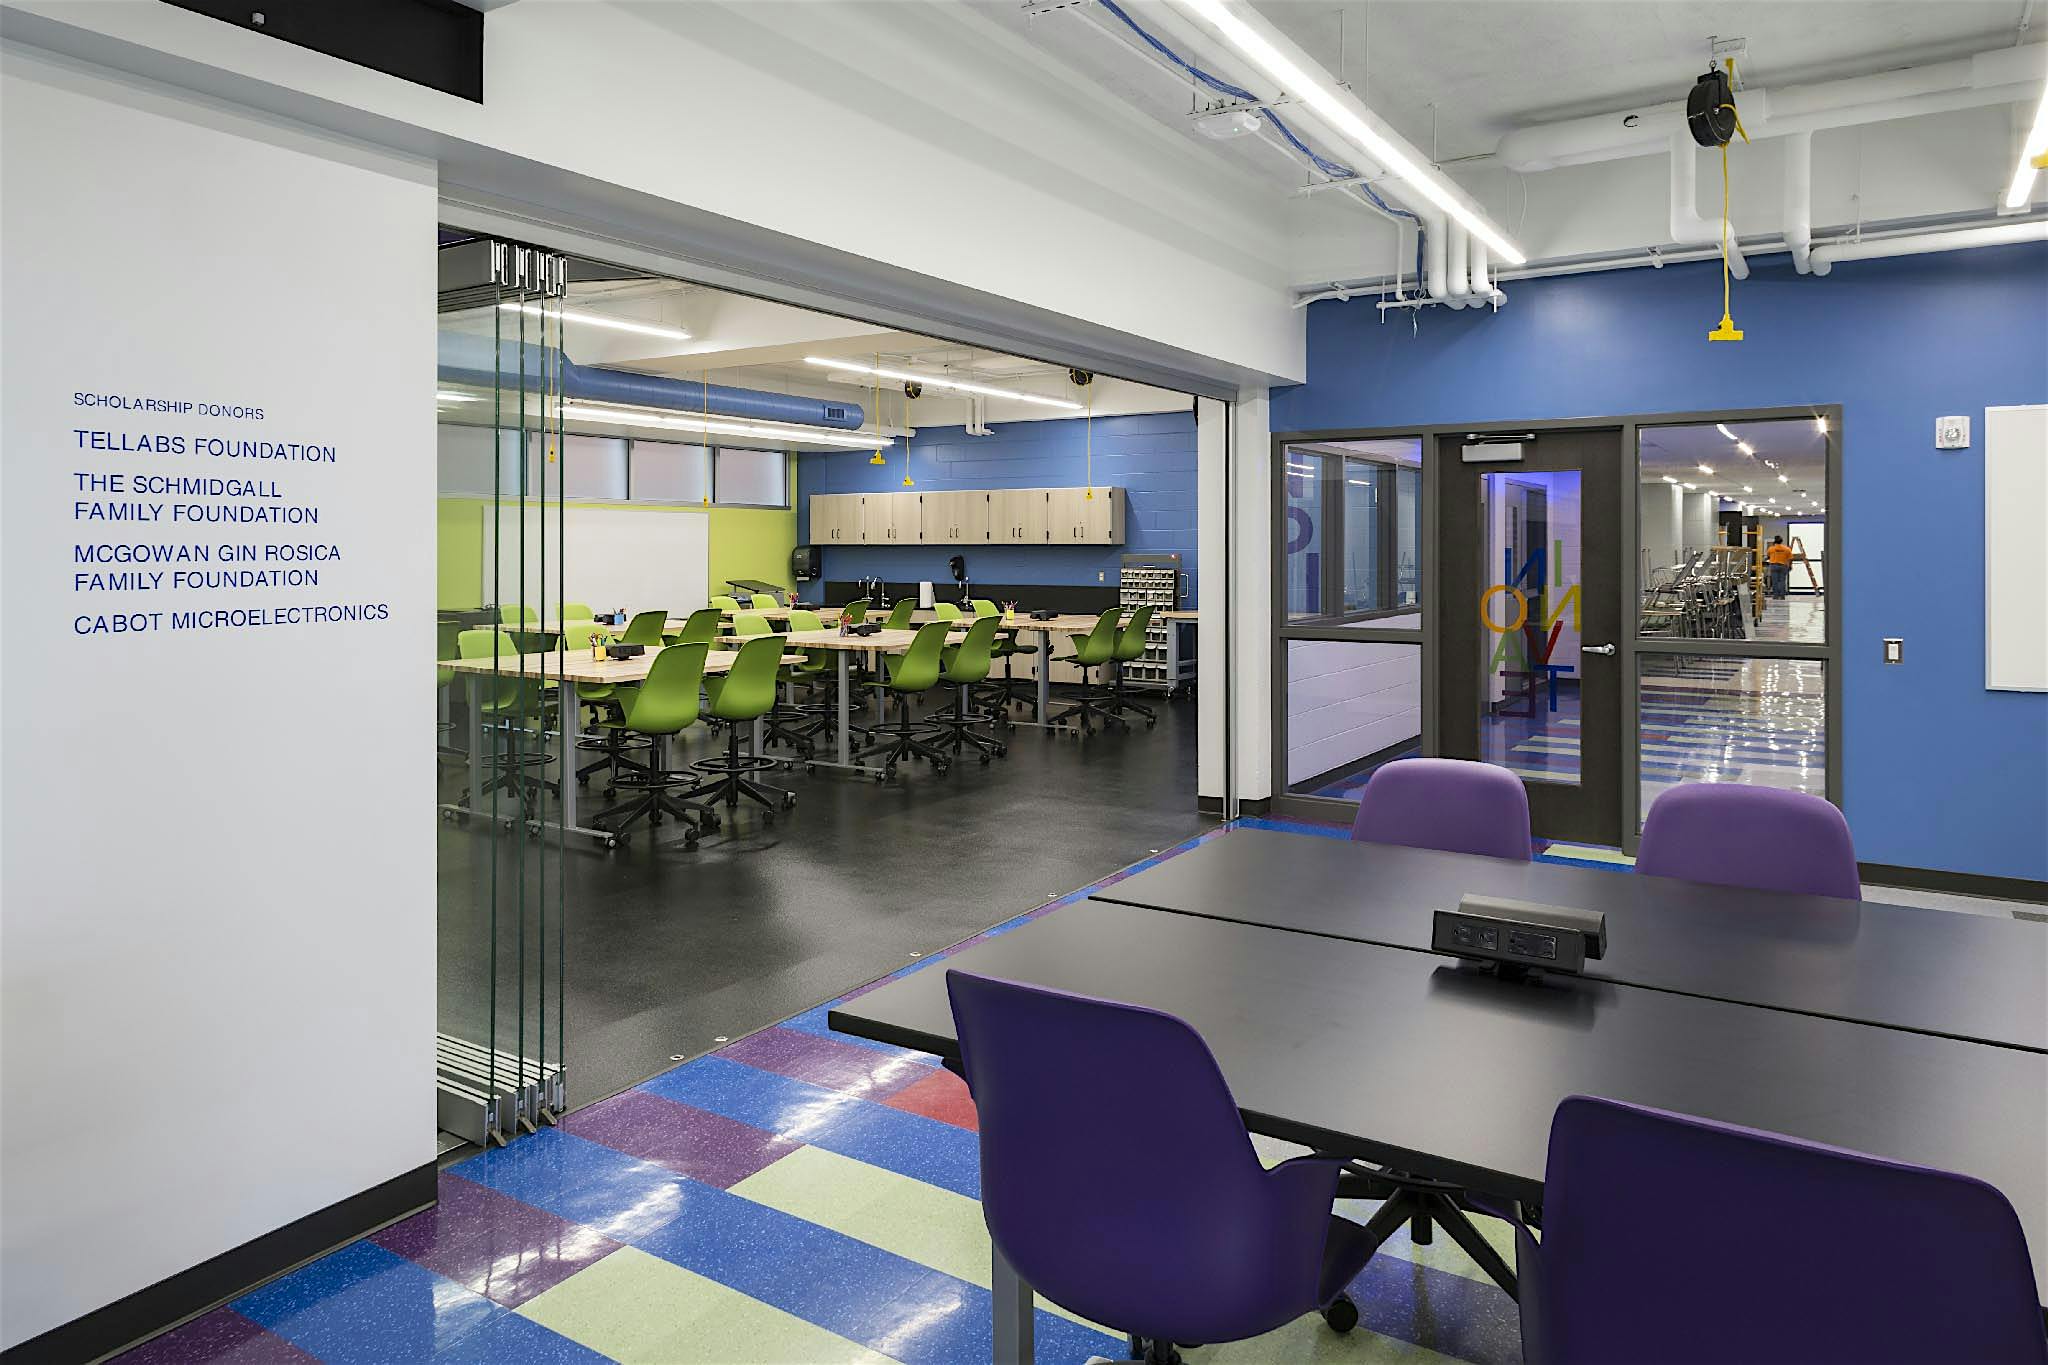 Sound control interior frameless glass wall systems between classrooms